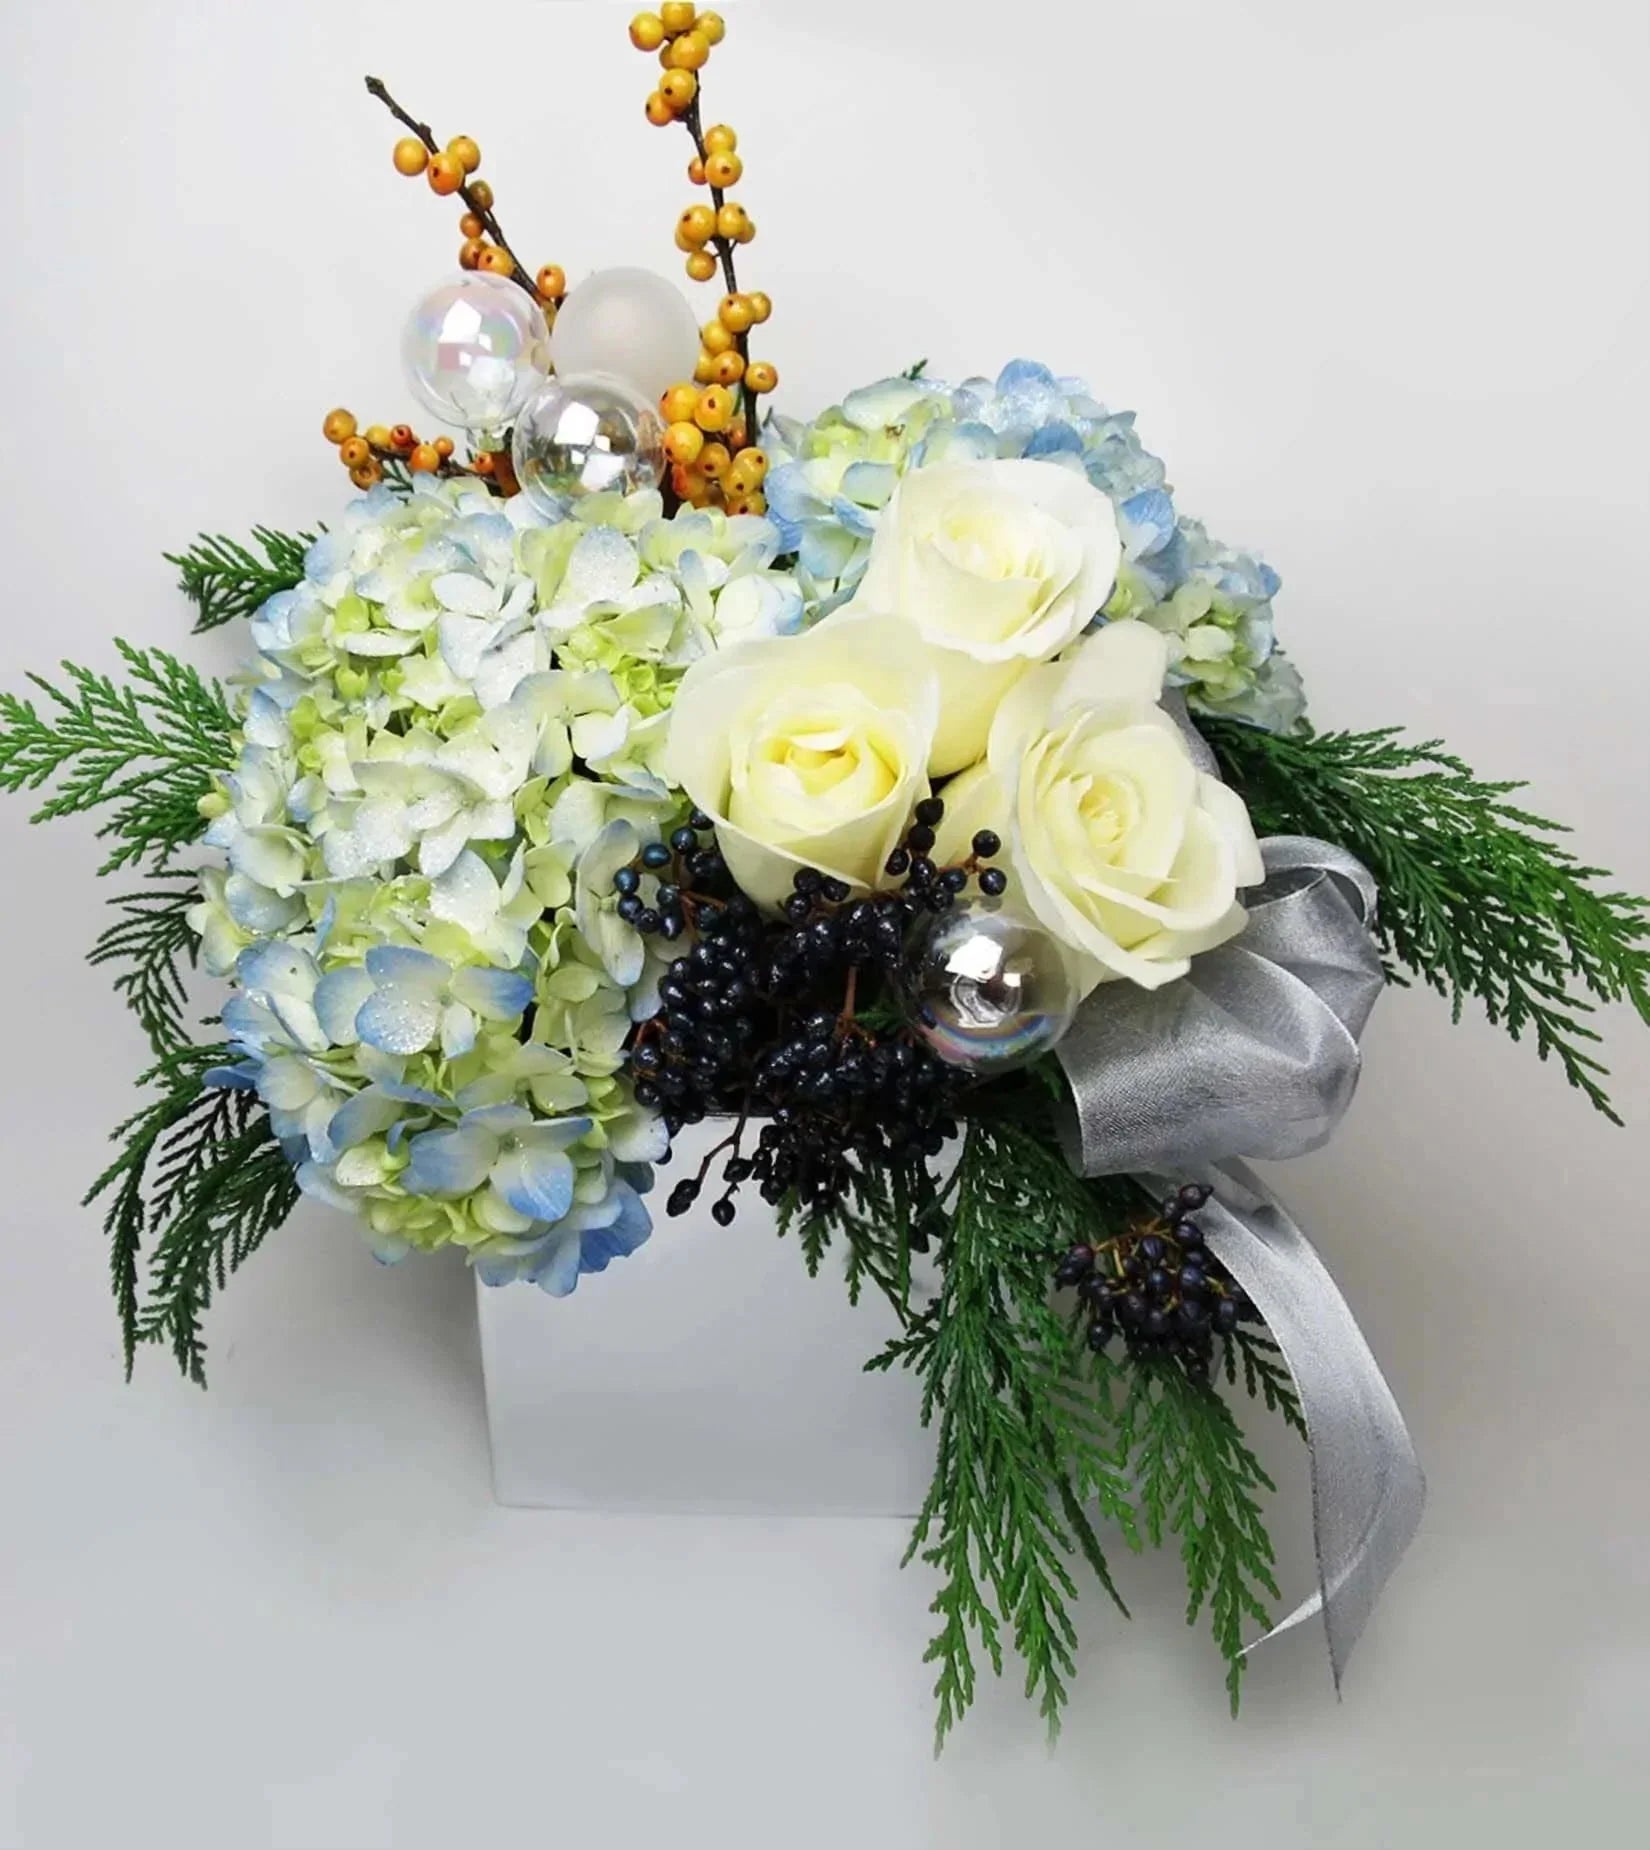 Seventh Night™ Bouquet - vase with blue hydrangeas and white roses is complemented by gorgeous orange ilex and black viburnum berries